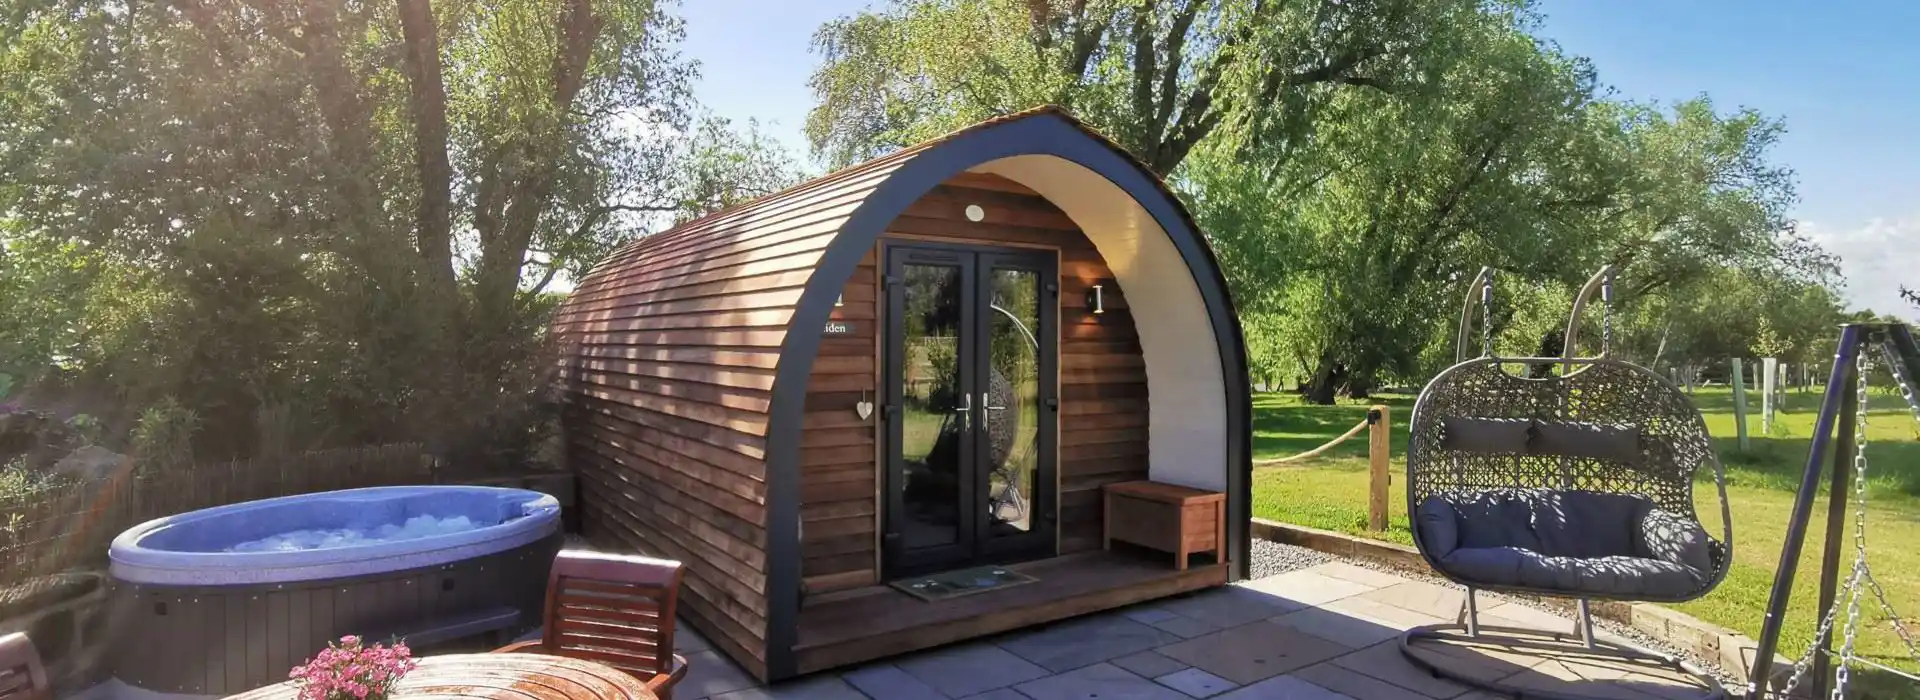 Glamping with hot tubs near me